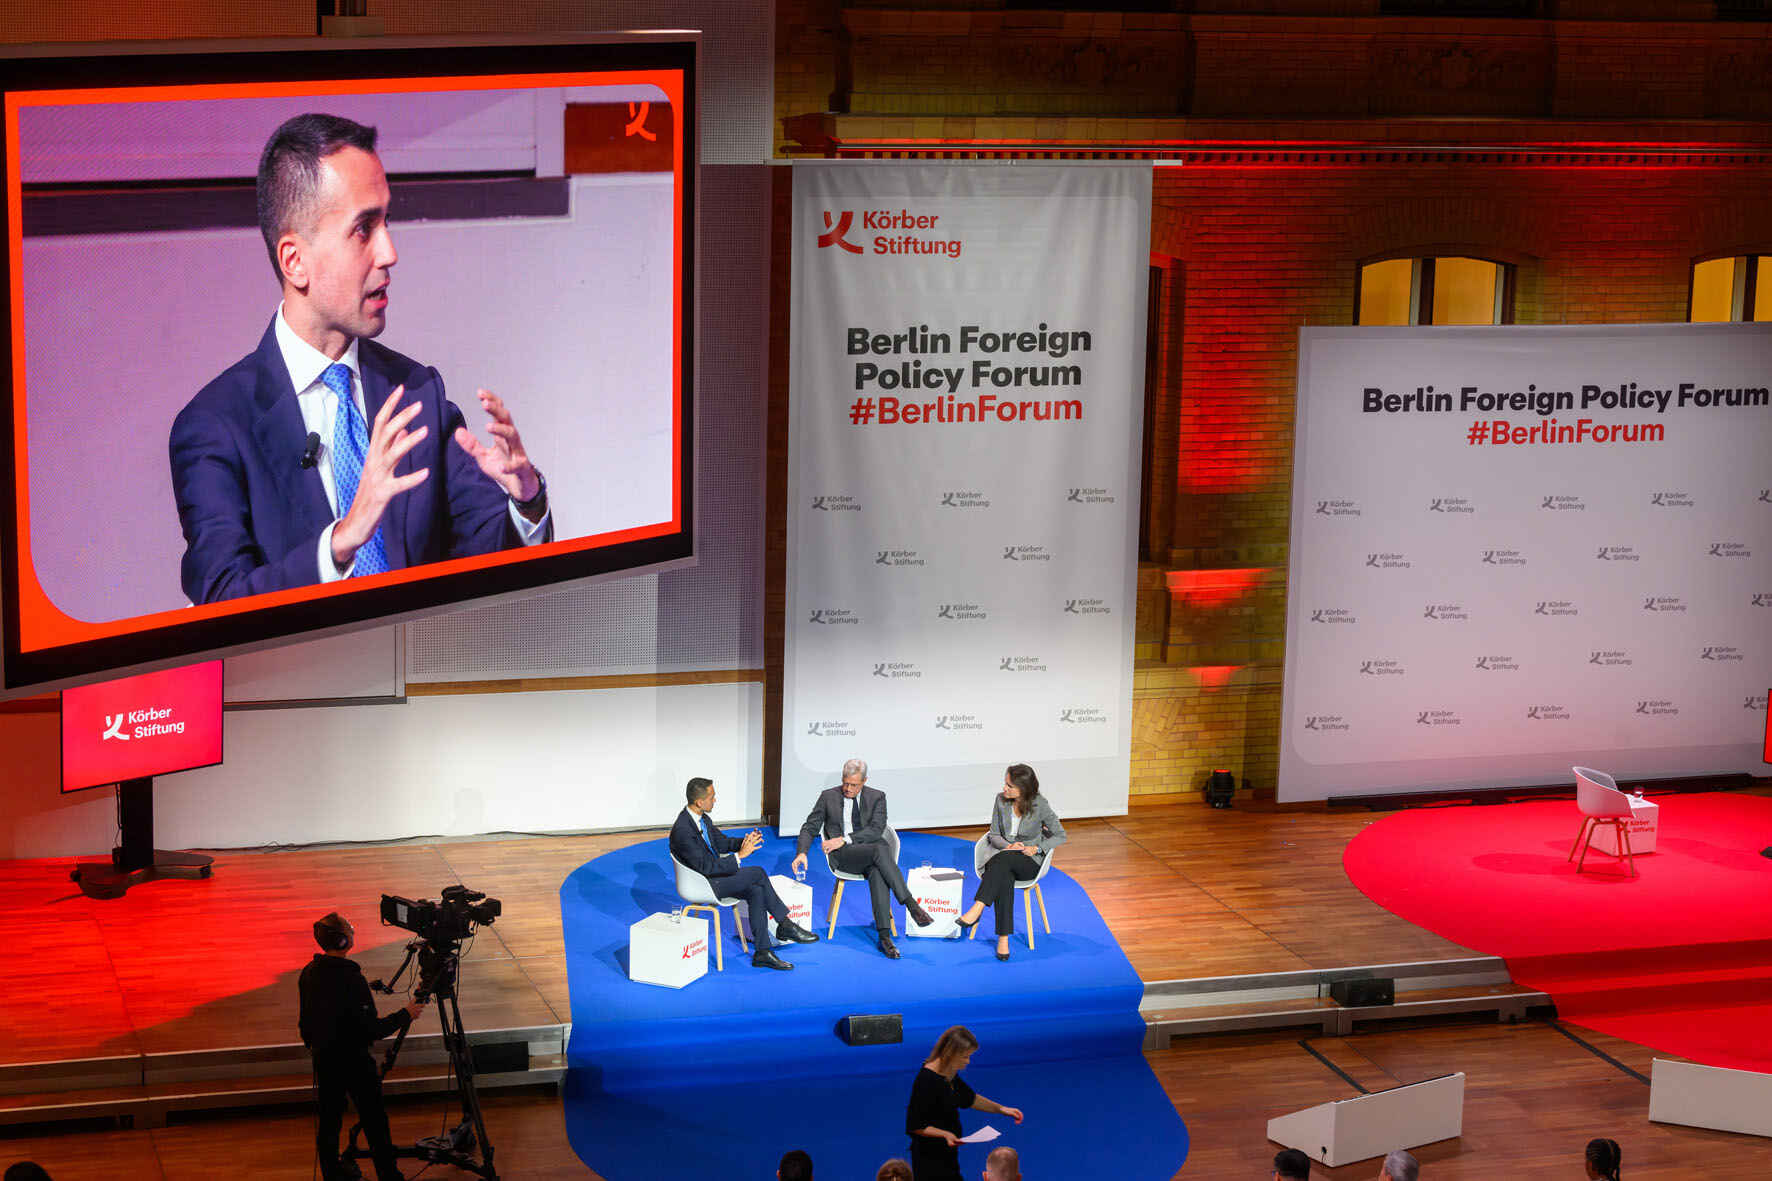 Middle East on the Brink: What Role for Europe? Luigi Di Maio, Norbert Röttgen, Magdalena Kirchner